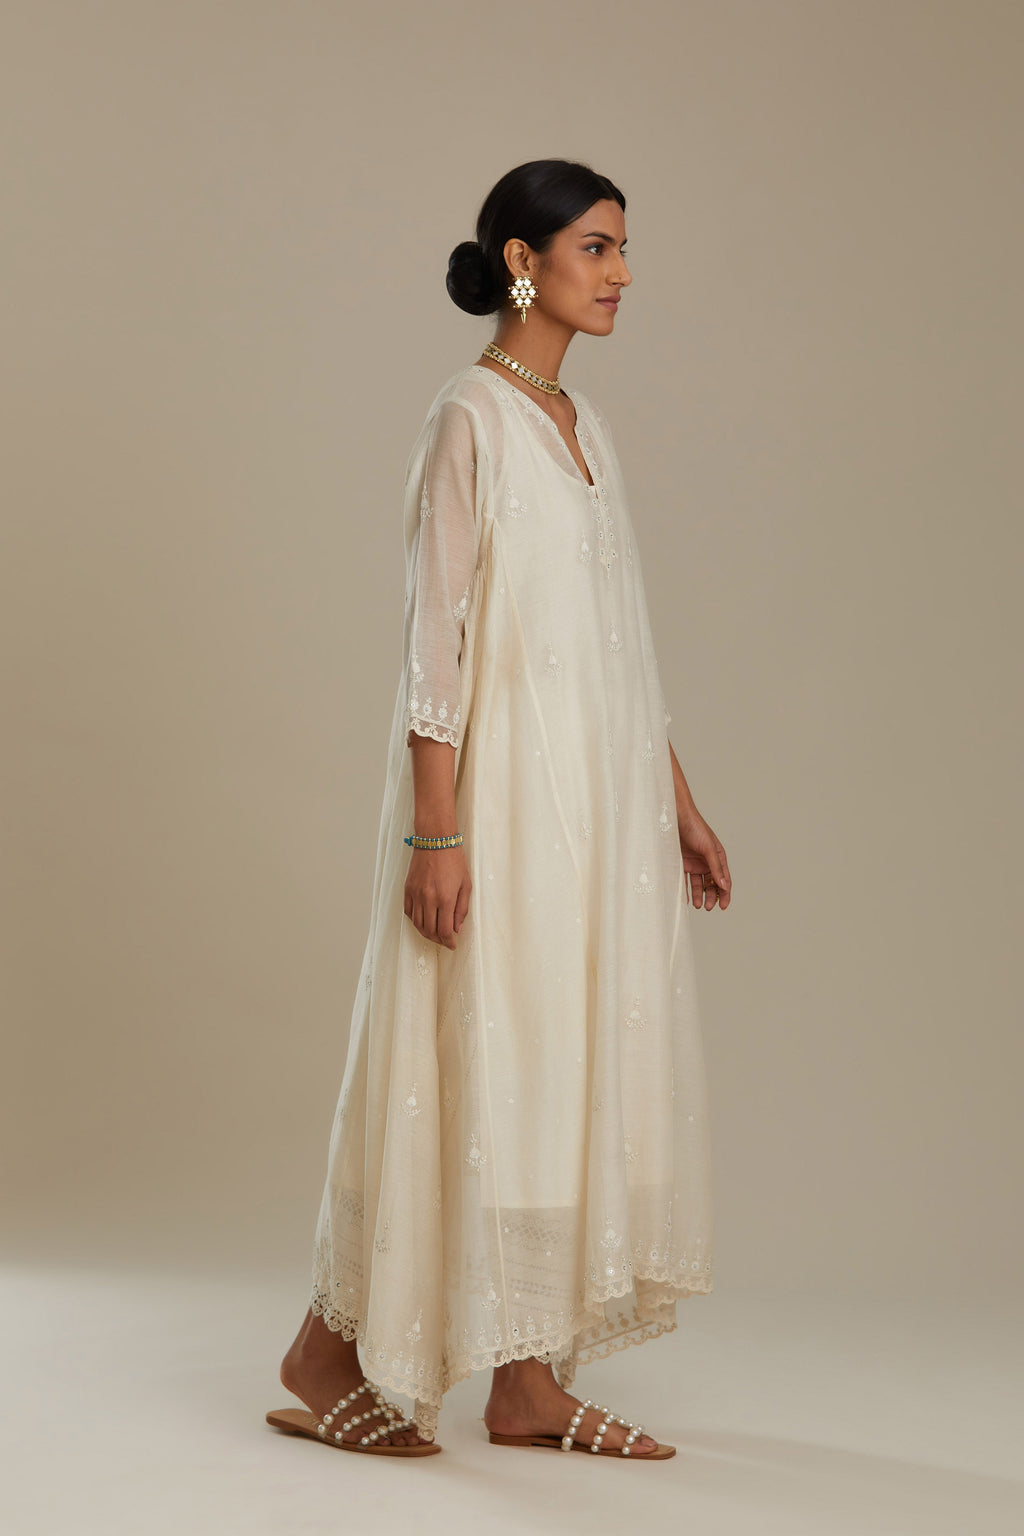 Off white cotton Chanderi kurta set with asymmetric hem, highlighted with sequins, beads and lace.